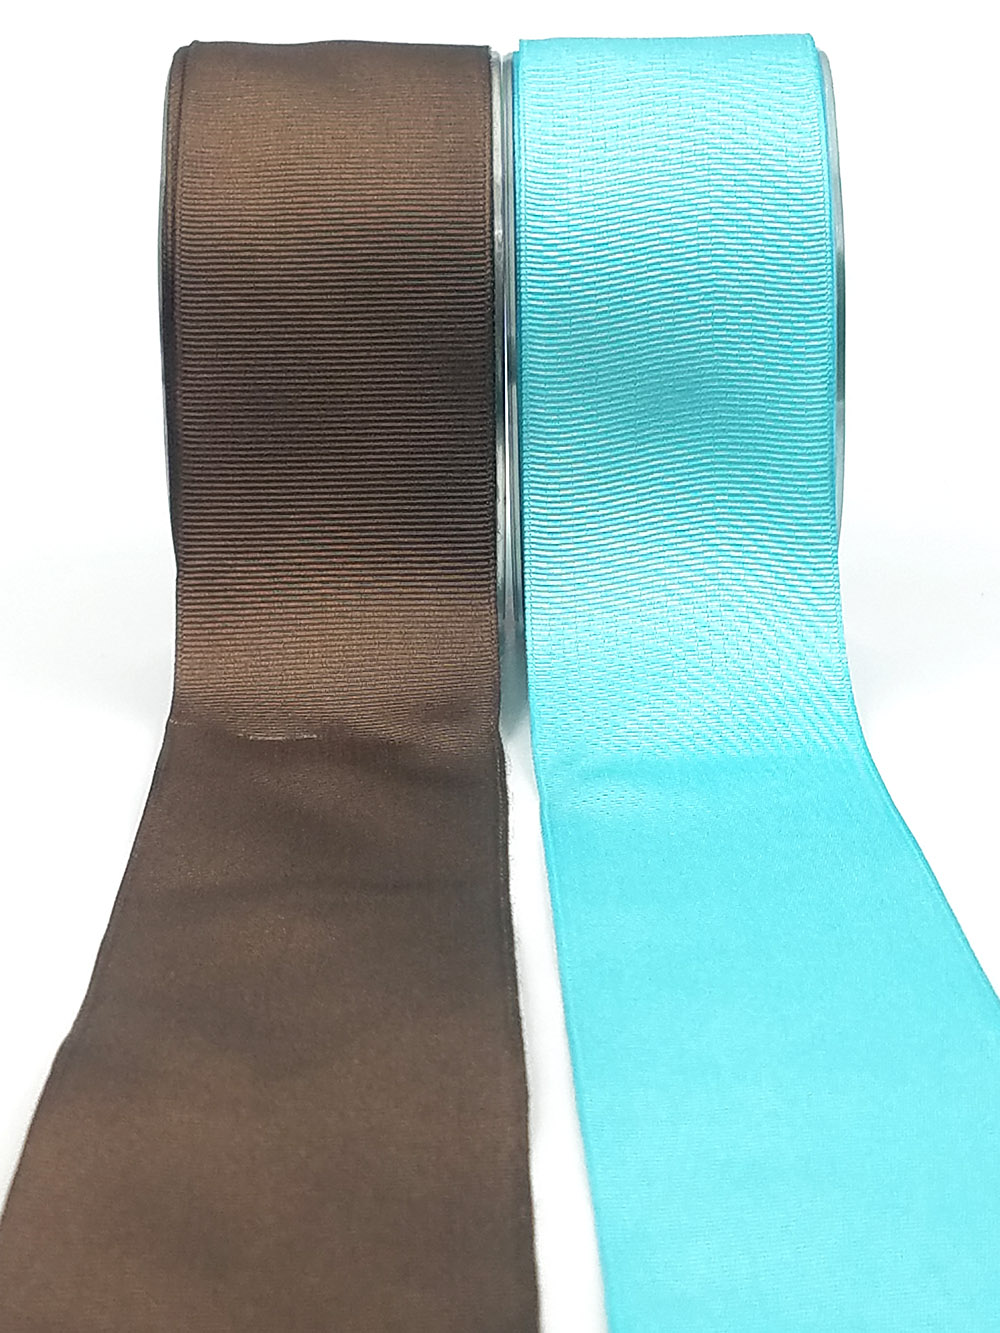 2 Inch Ribbon - Online Ribbons by Width - May Arts